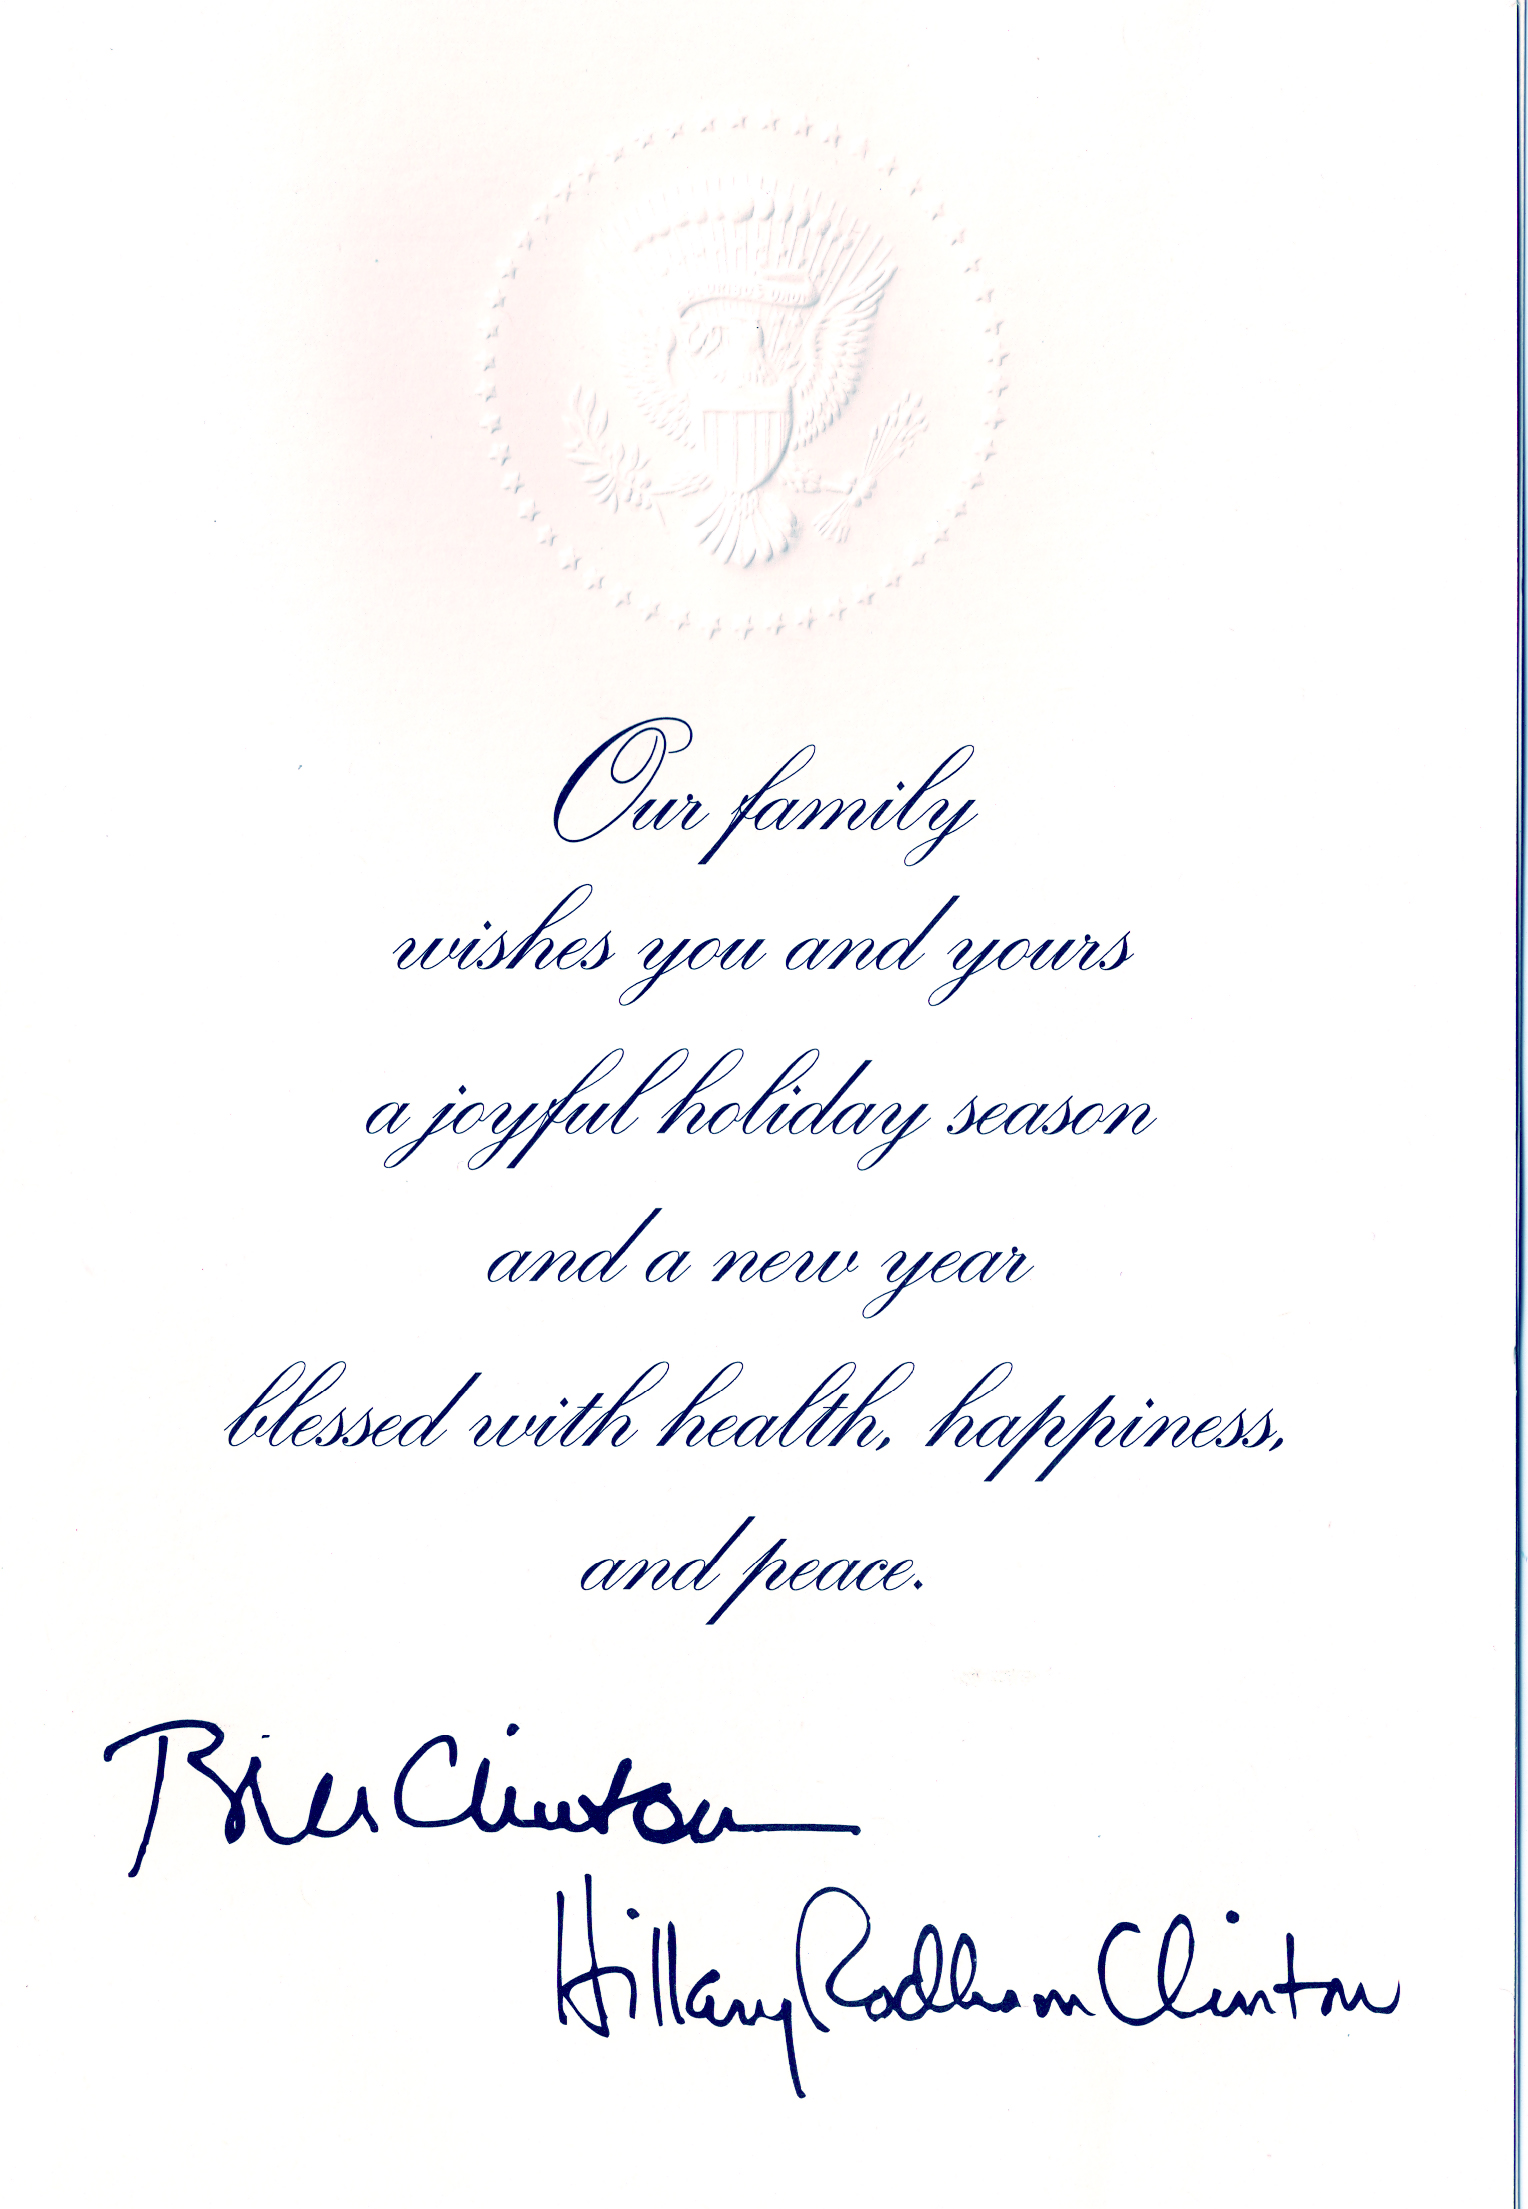 Greeting card with autopenned signatures of Bill and Hillary Clinton